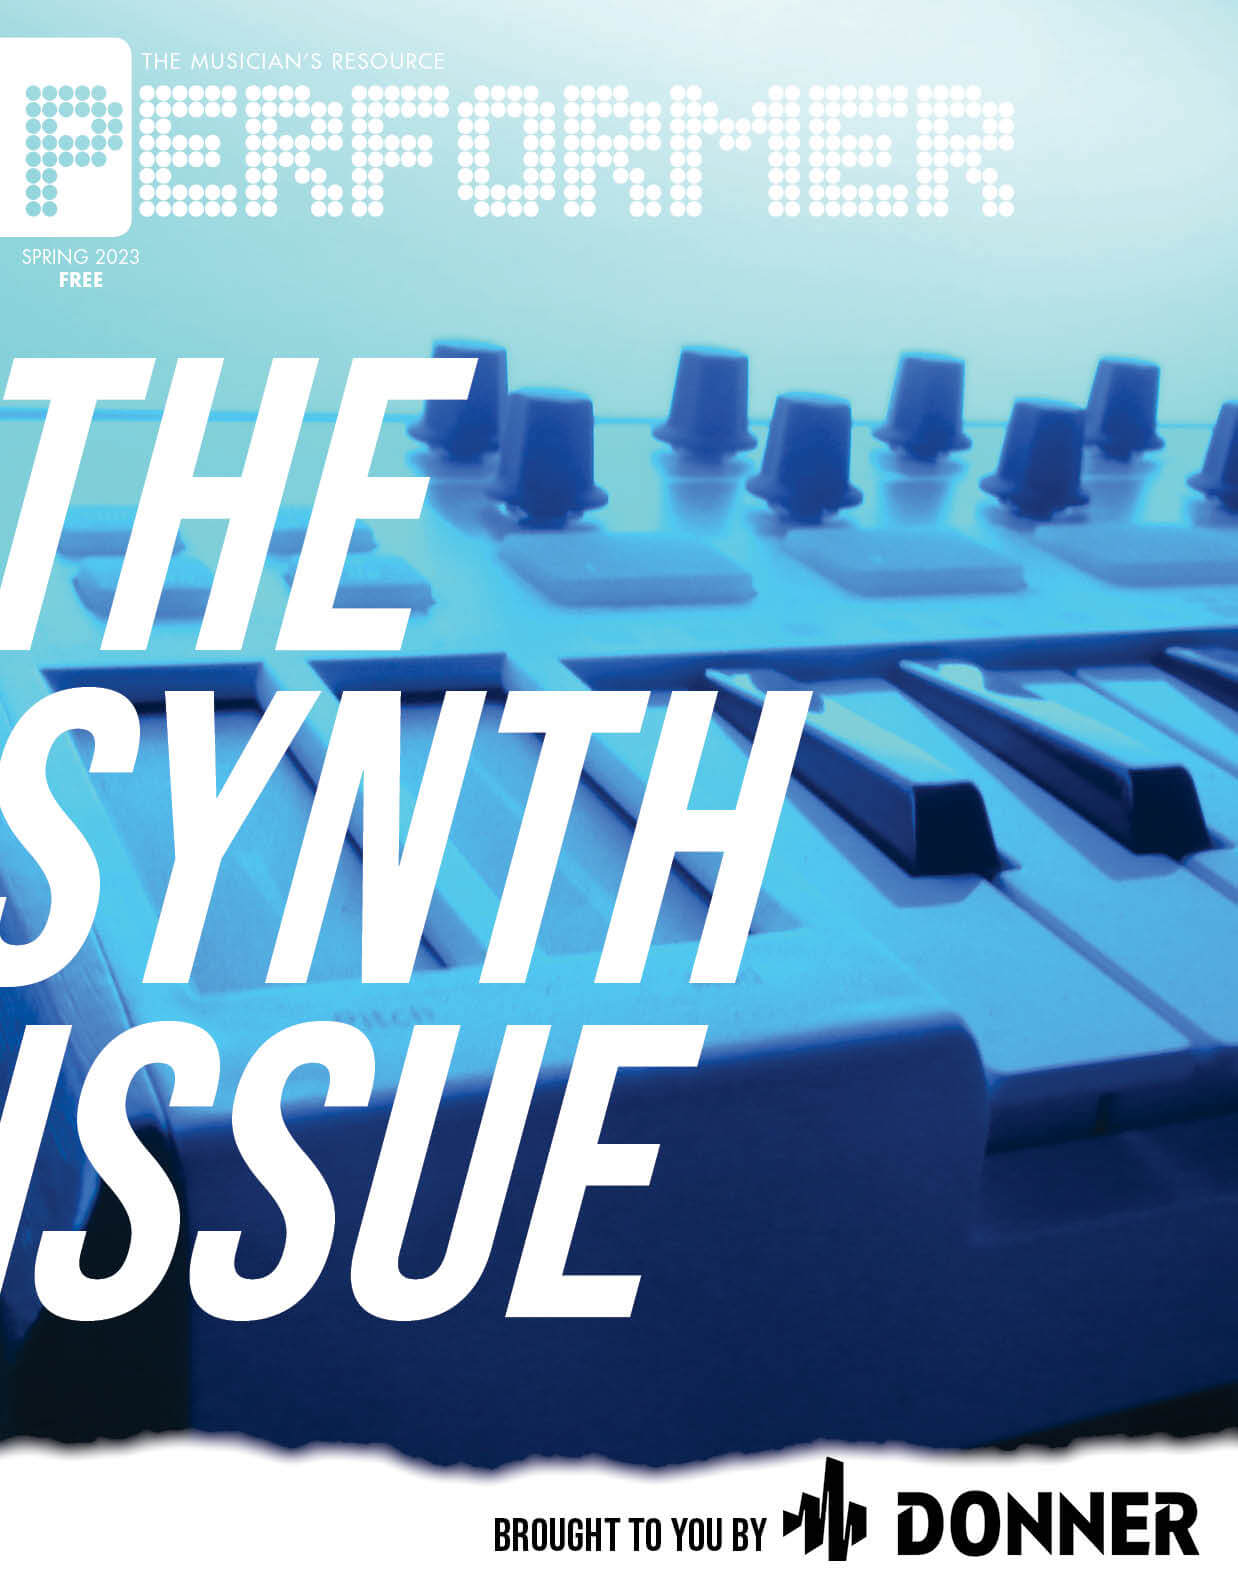 The SYNTH ISSUE is out now!